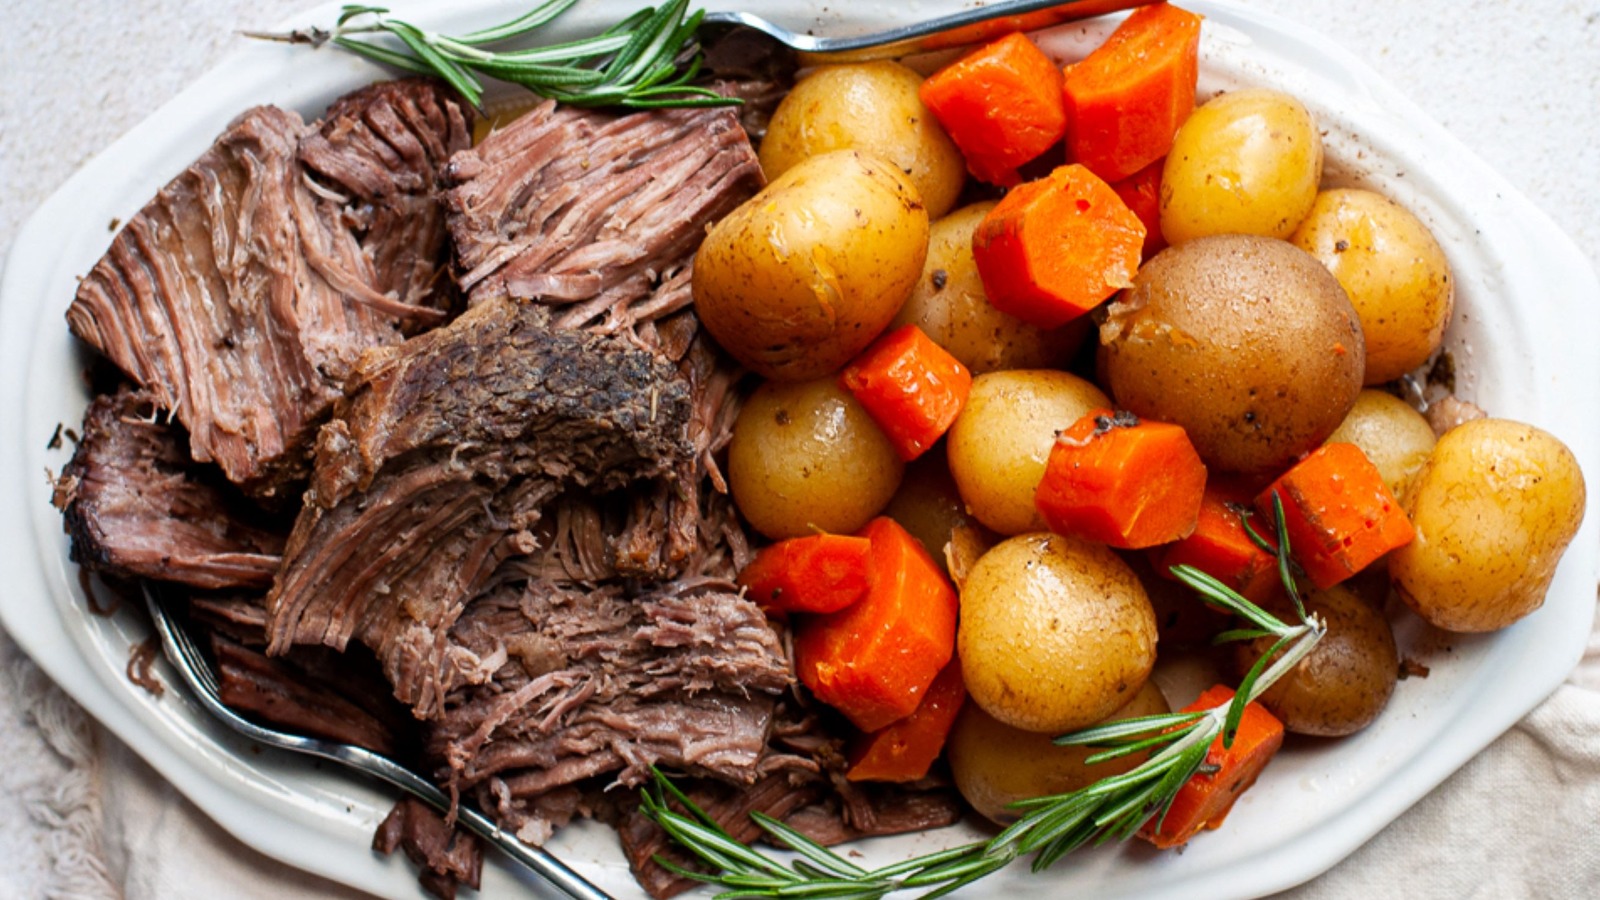 The Best Winter Wine To Pair With Your Slow Cooked Roast